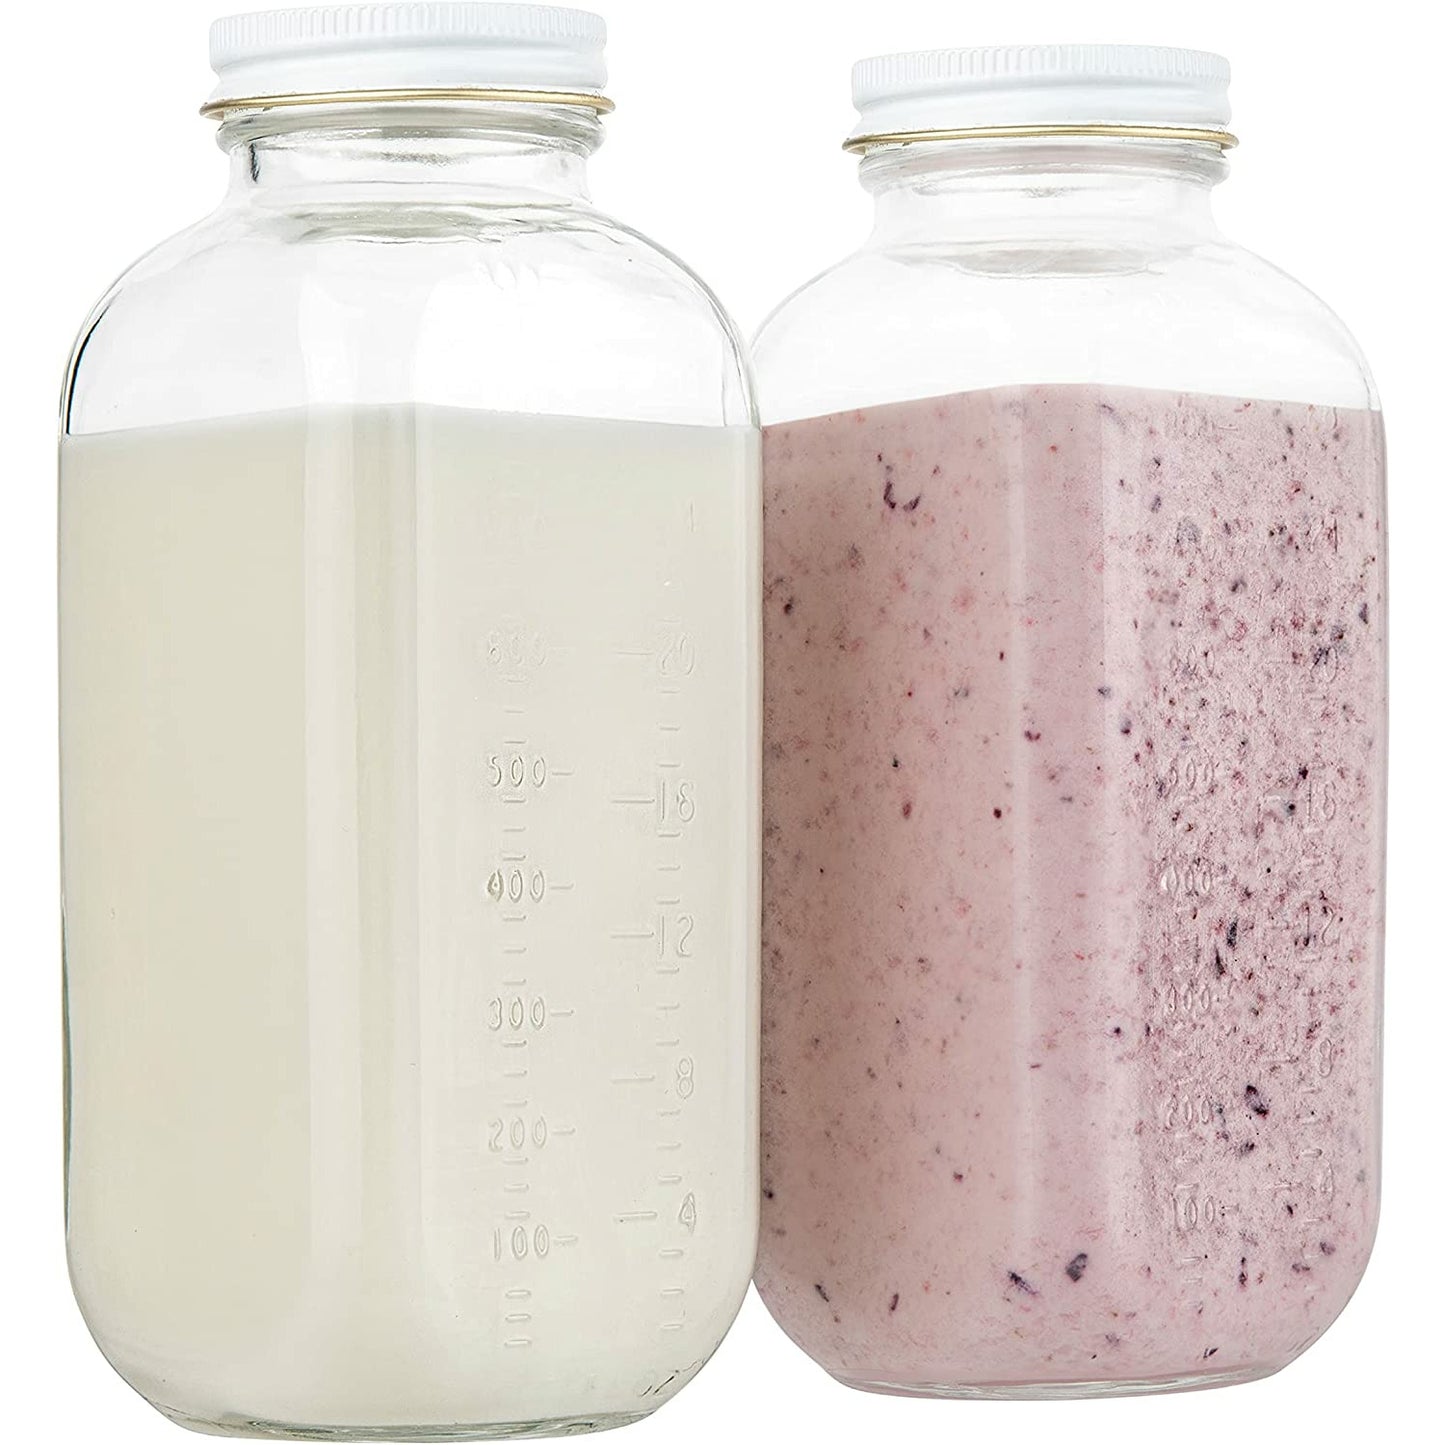 Kitchentoolz 16 Oz Glass Milk and Creamer Bottle with Caps